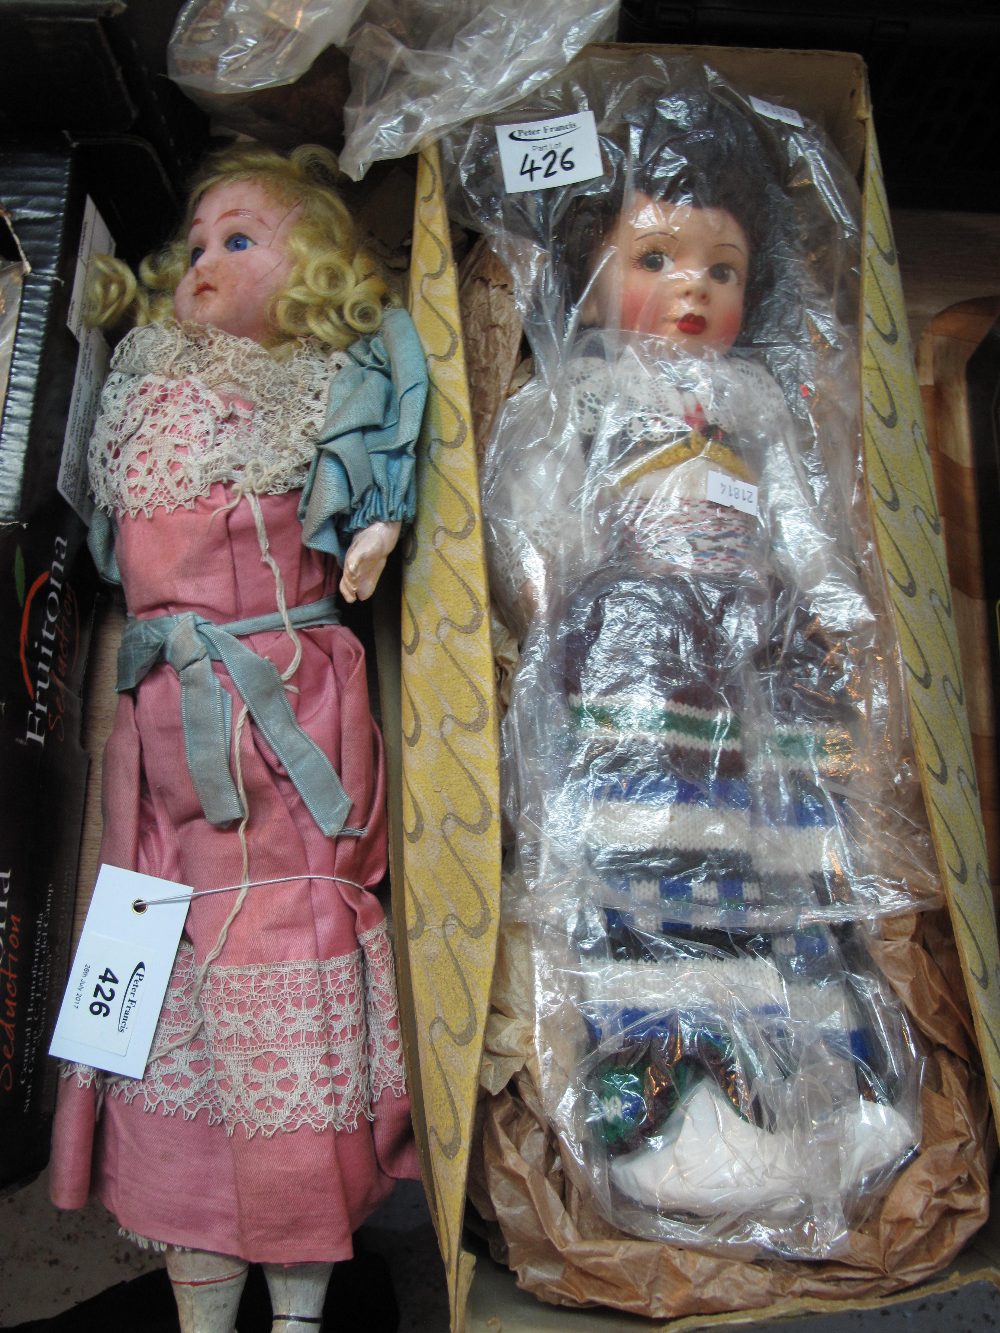 Victorian wooden body wax headed wooden doll with glass eyes and natural wig in fitted attire,